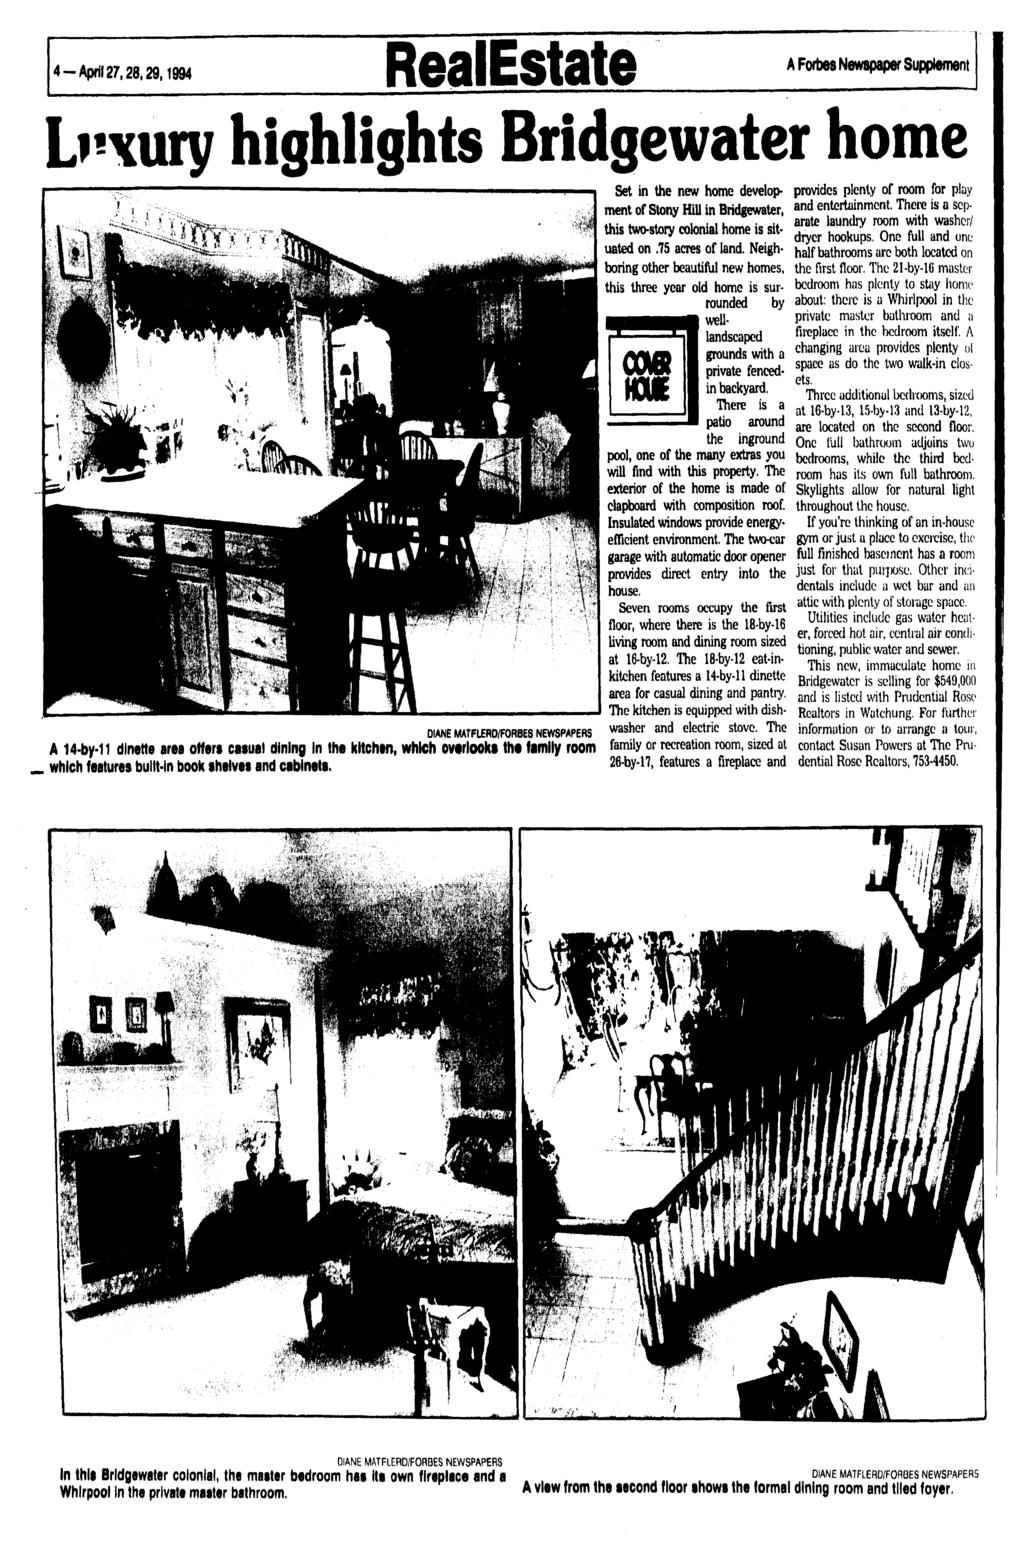 4 -April 27,28,29,1994 RealEstate A Forbes Newspaper Supplement Luxury highlights Bridgewater home DIANE MATFLERD/FORBES NEWSPAPERS Set in the new home development of Stony Hill in Bridgewater, this